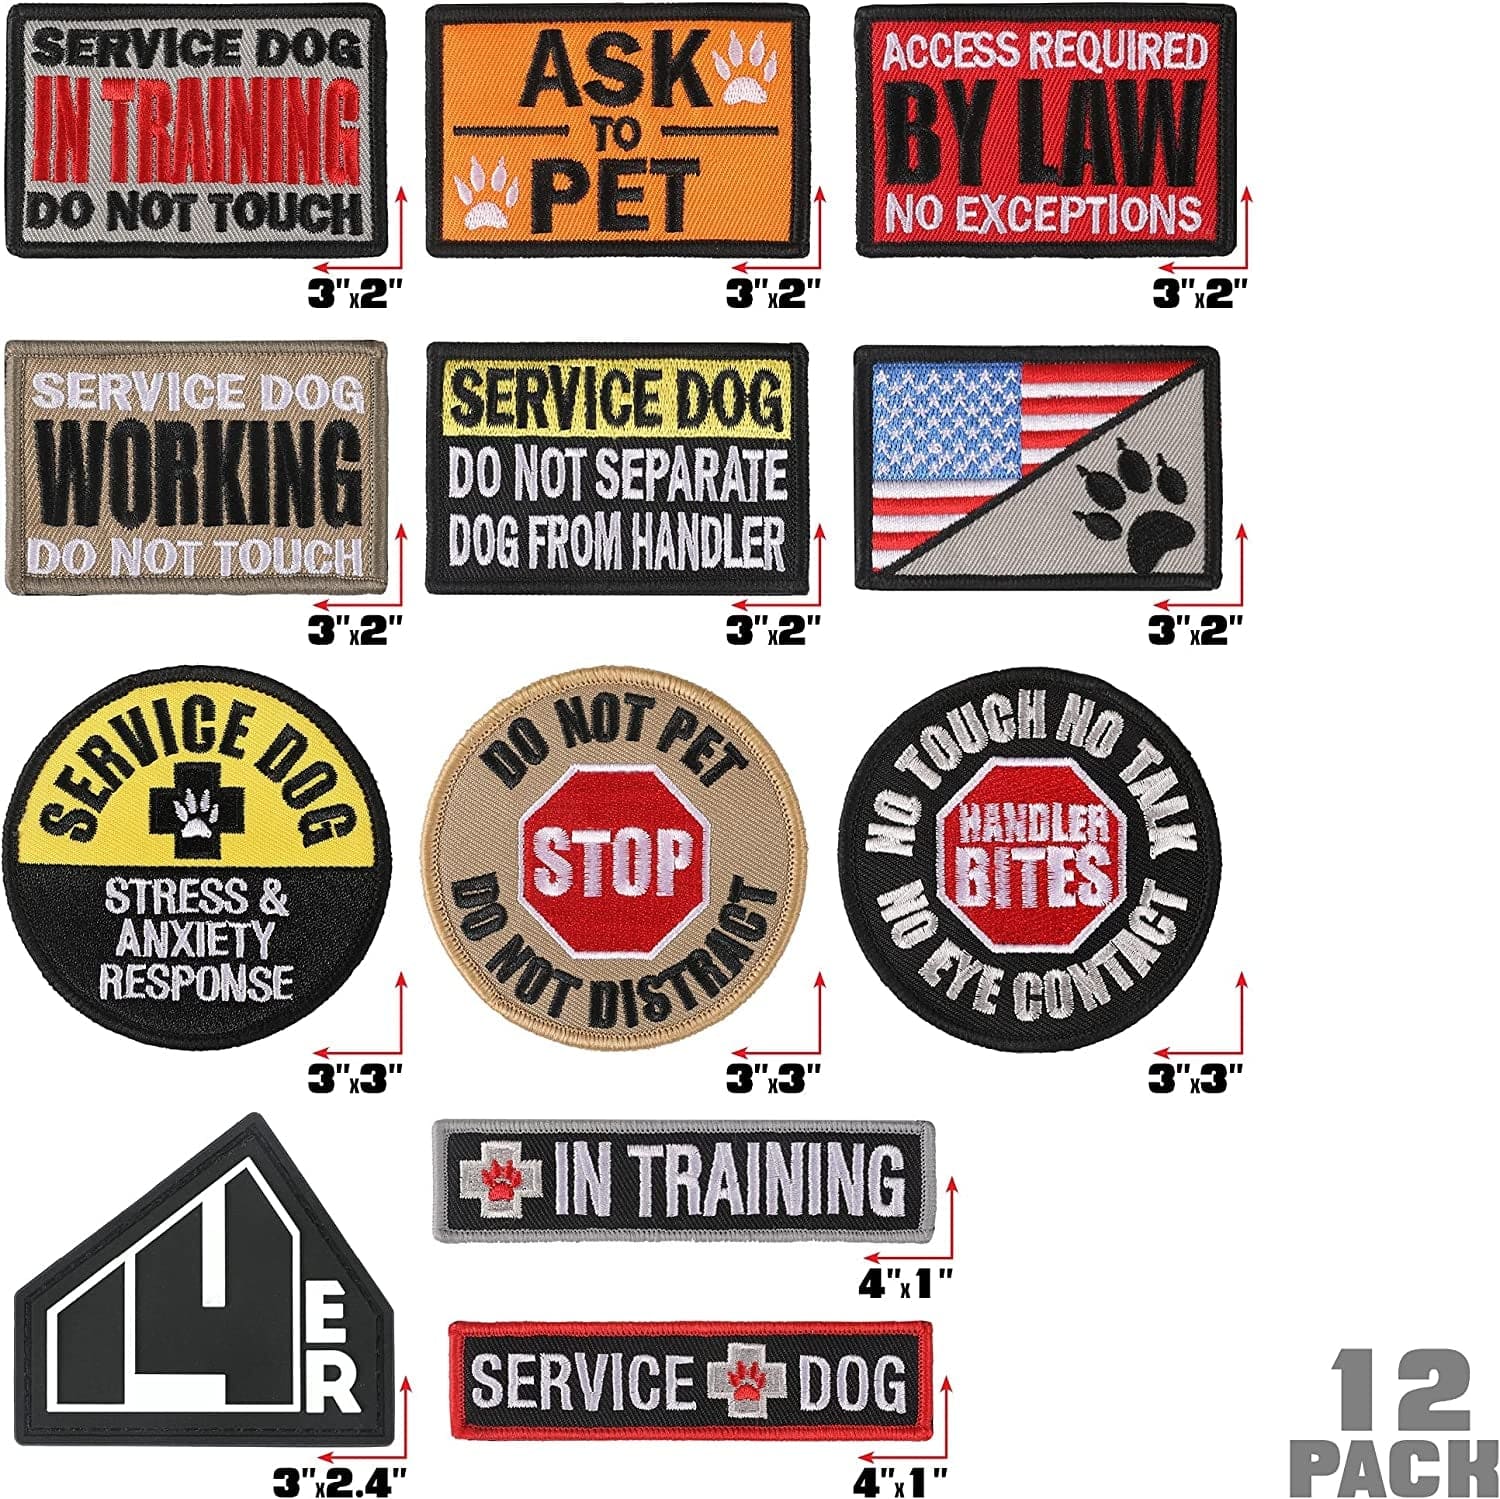 14Er Tactical Service Dog Patches Ask to Pet, Do Not Pet, in